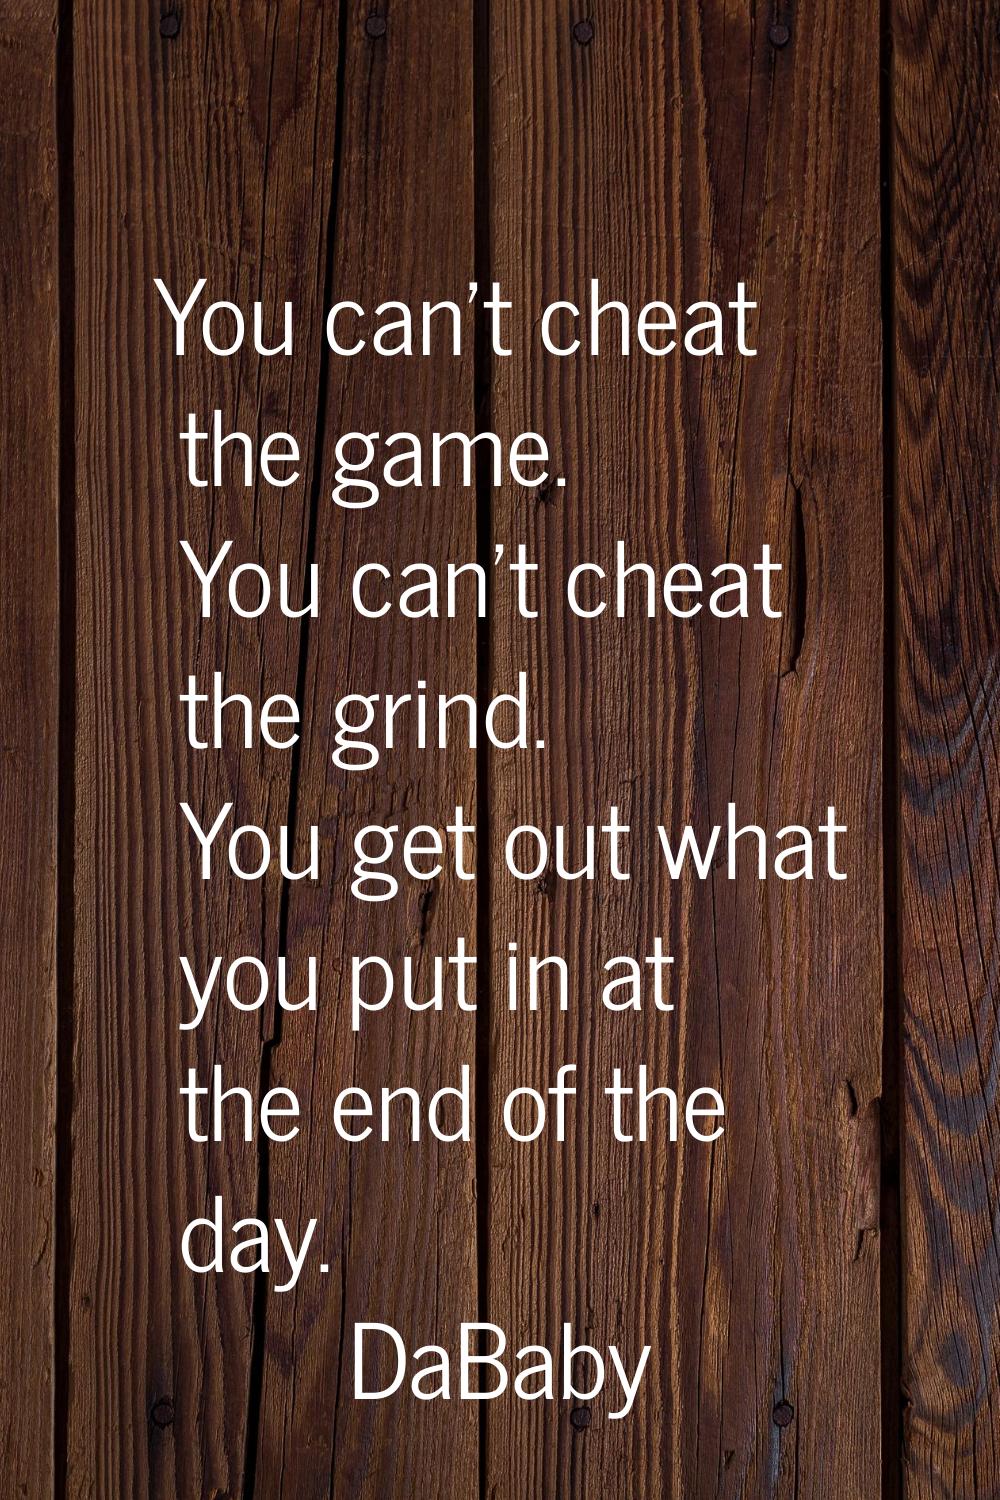 You can't cheat the game. You can't cheat the grind. You get out what you put in at the end of the 